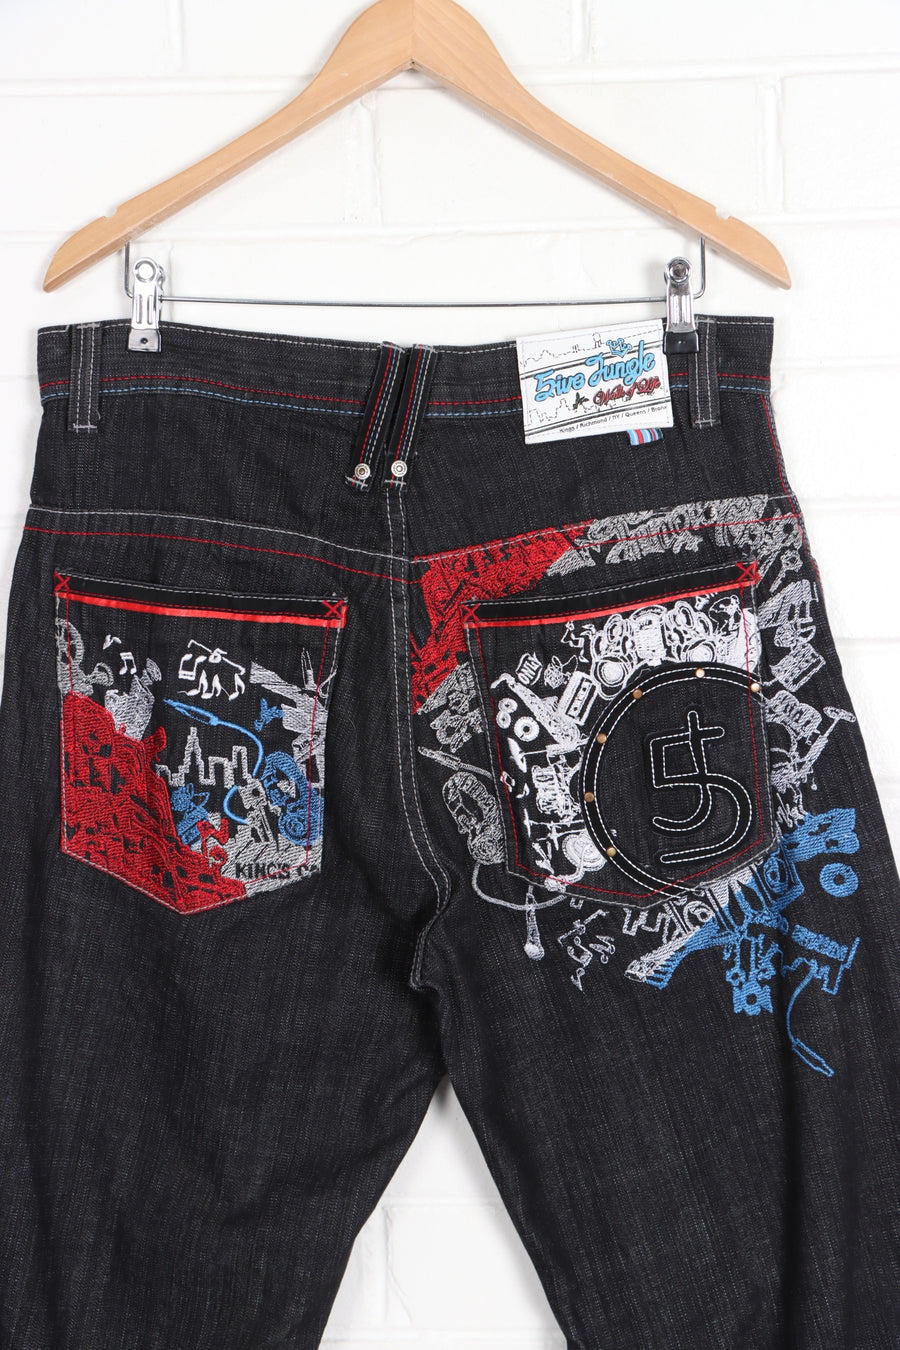 5IVE JUNGLE Contrast Stitch Y2K Embroidered Music Jeans (36)